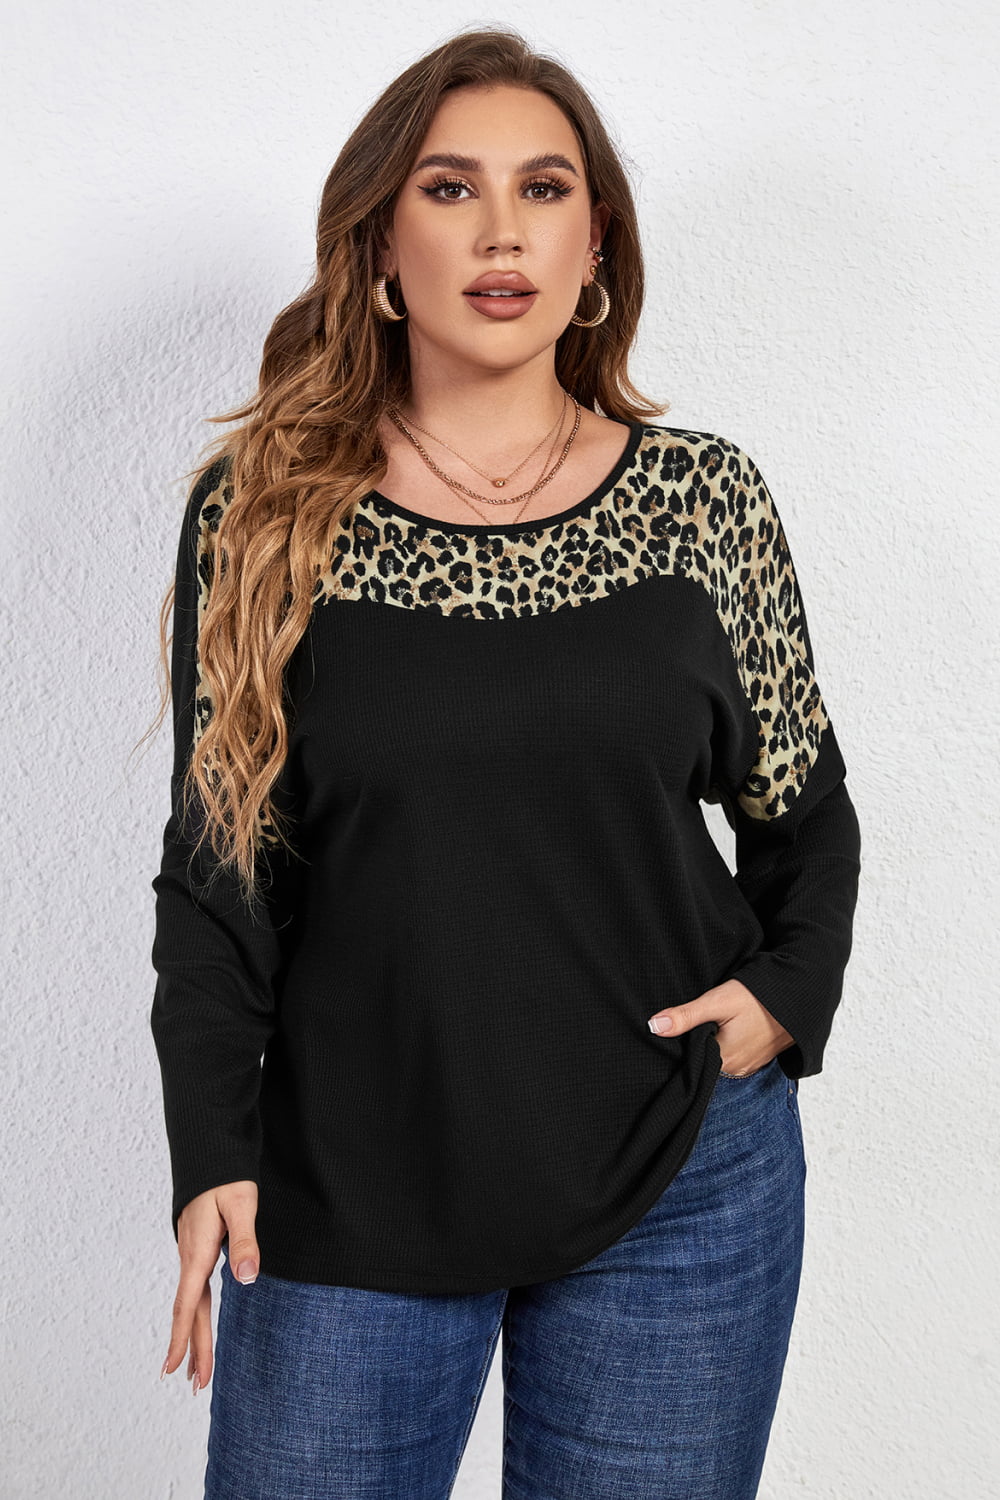 Melo Apparel Leopard Trim Round Neck Long Sleeve Tee